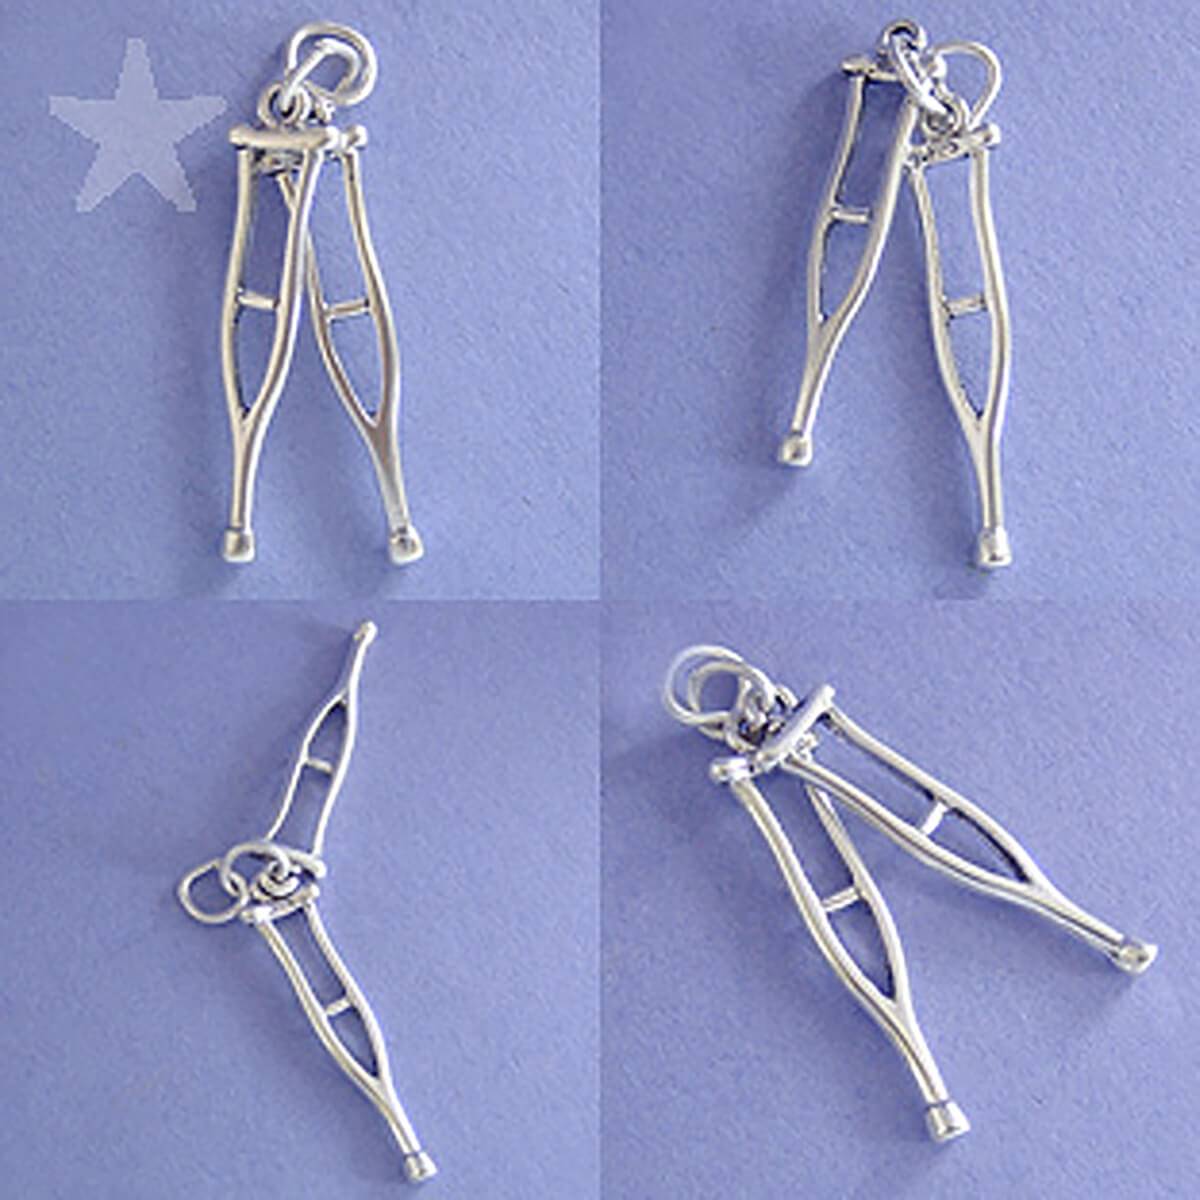 Crutches Charm Sterling Silver Medical Pendant